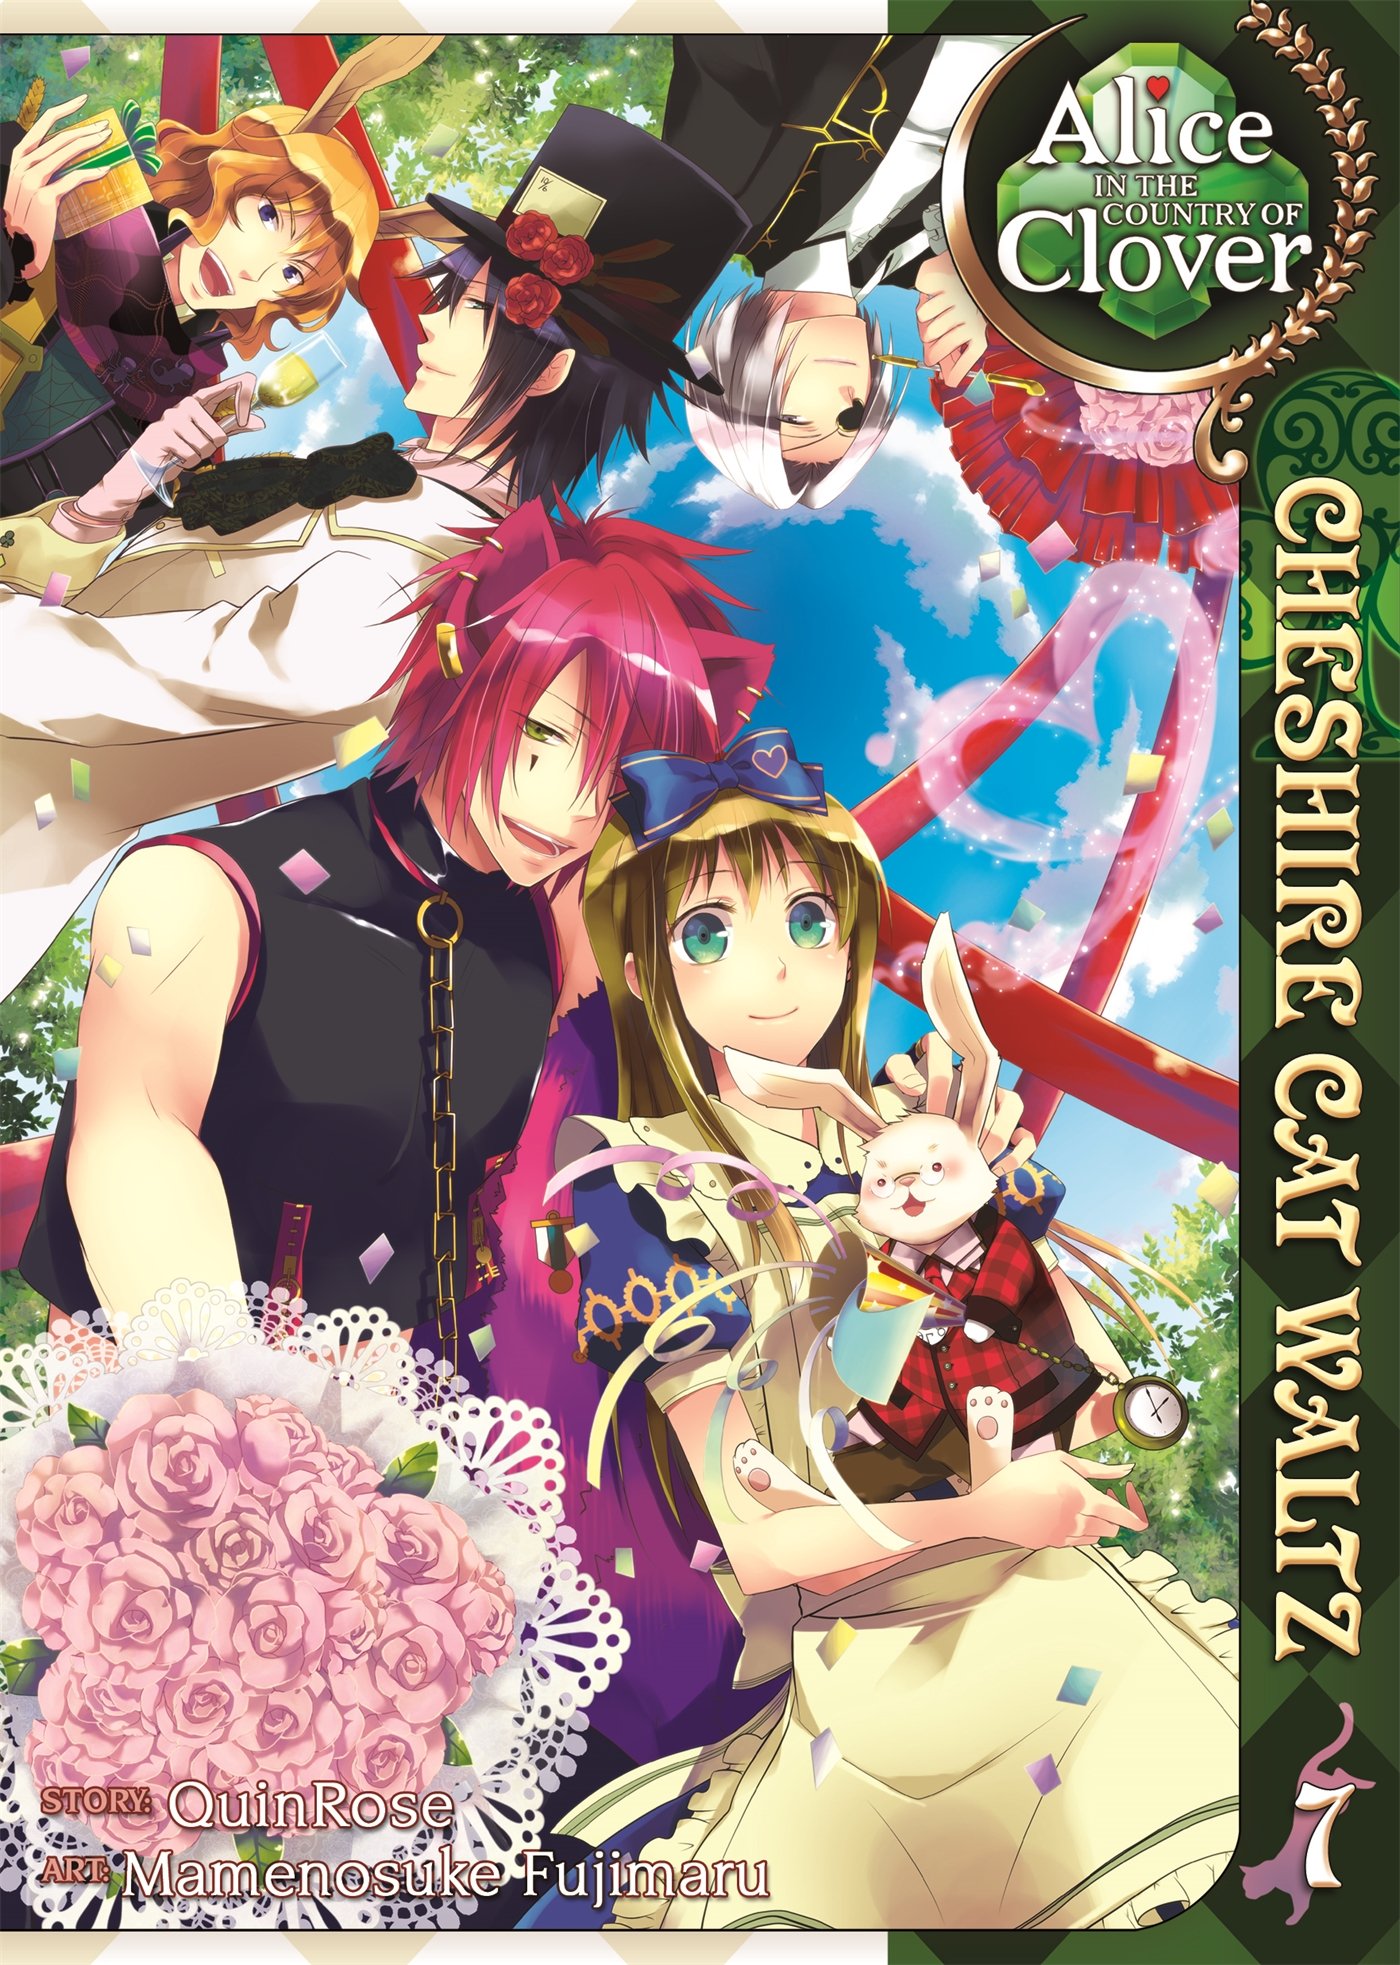 Alice in the Country of Clover: Cheshire Cat Waltz - Volume 7 | QuinRose